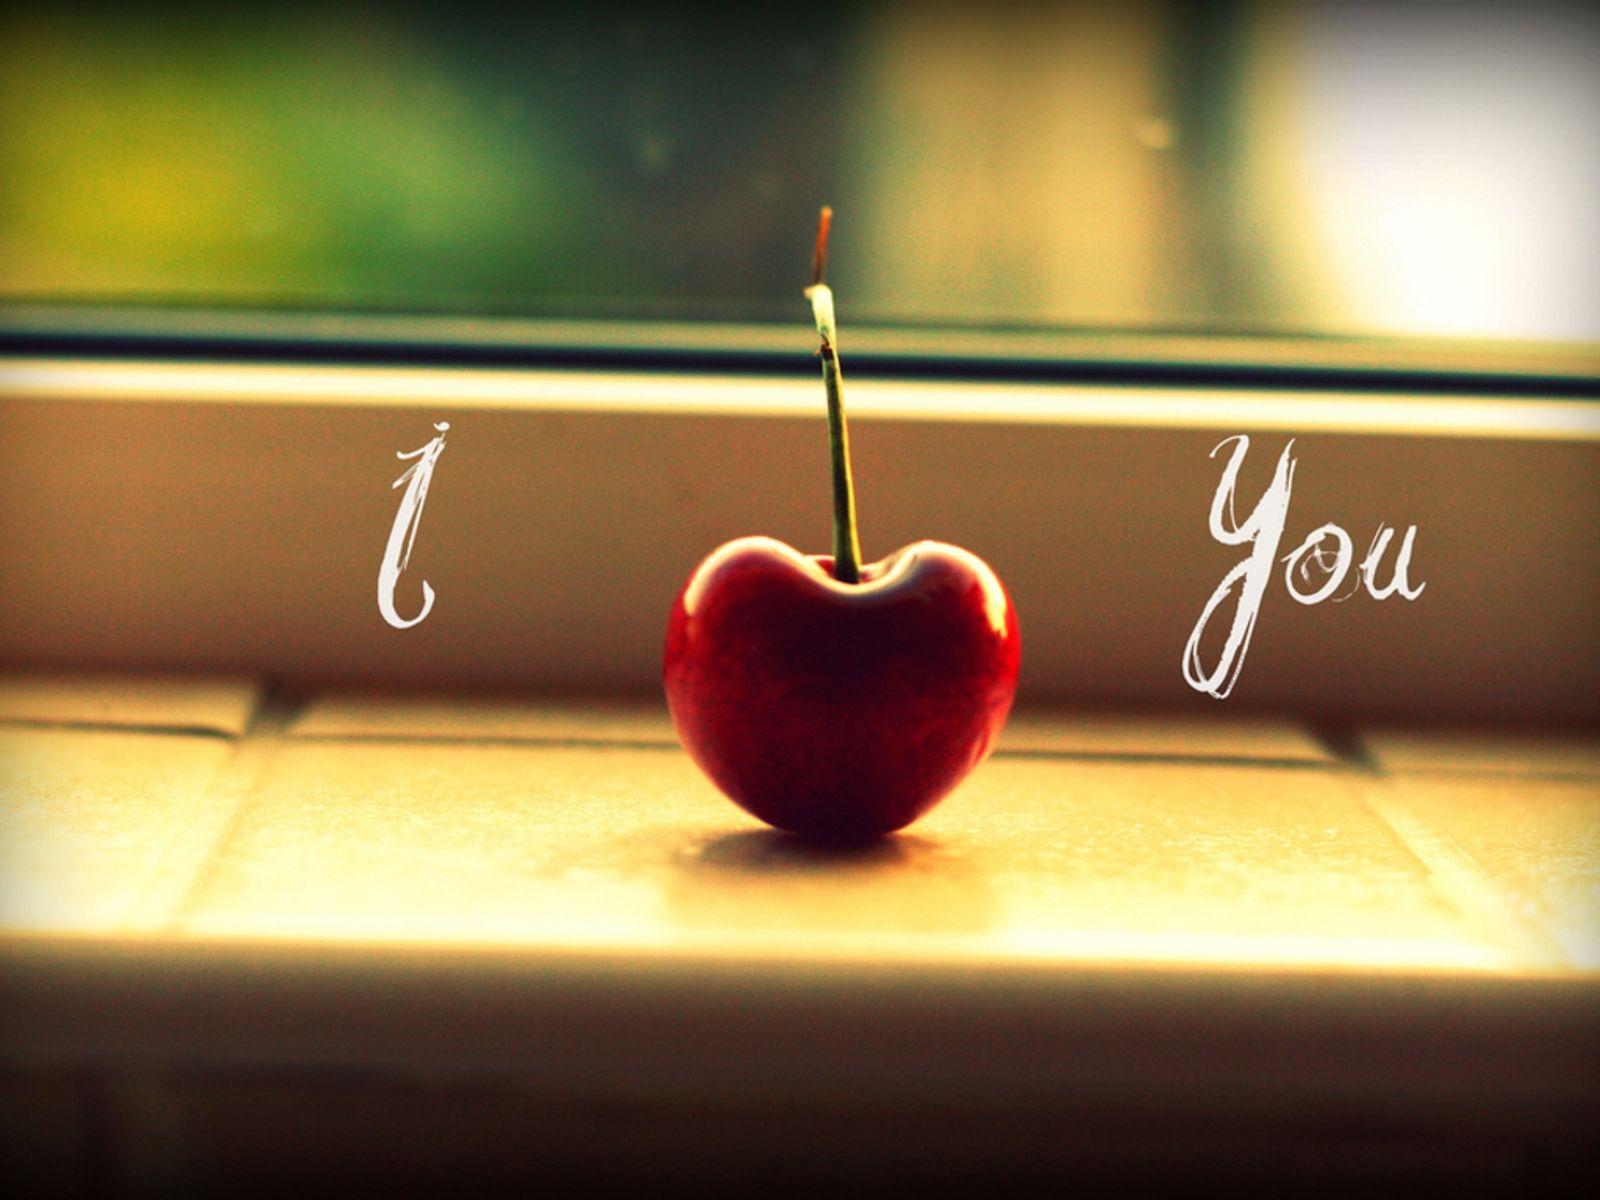 I Love You HD Image Wallpaper. I Love You Free Download